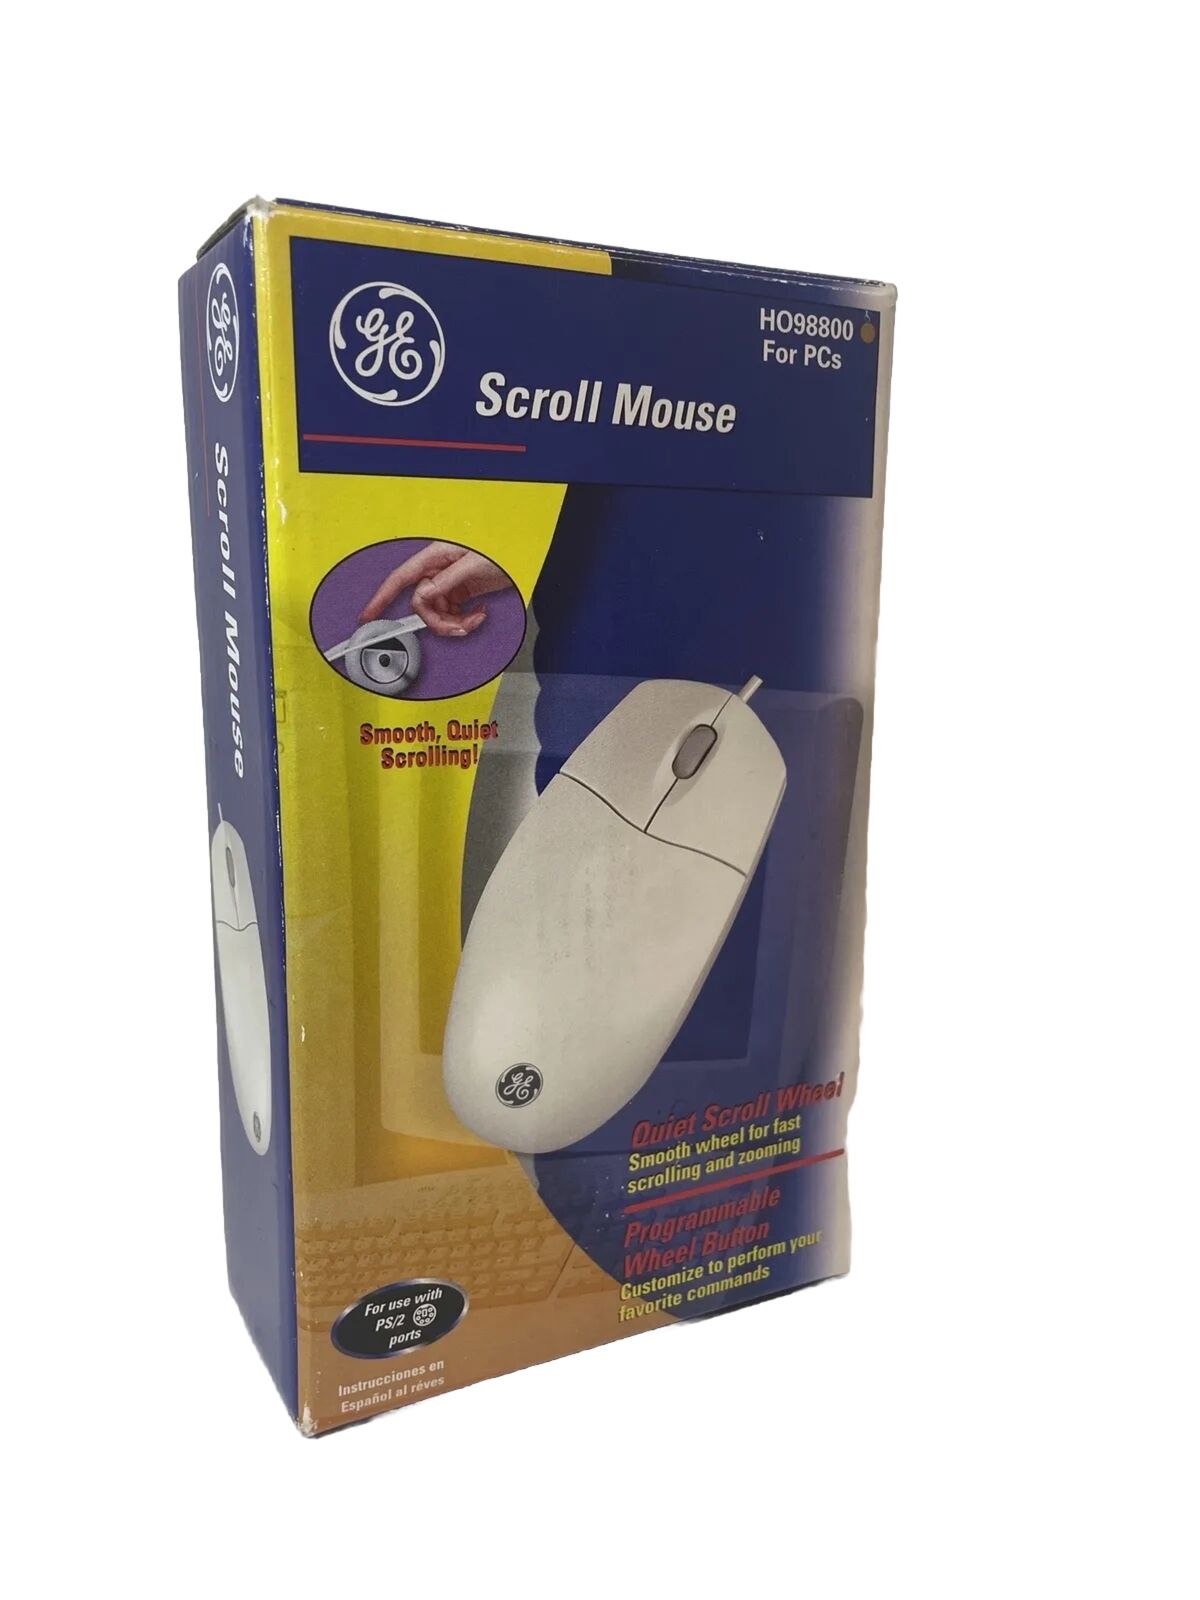 Retro PC Mouse By General Electric GE  Two Button Mouse For PCs Vintage N